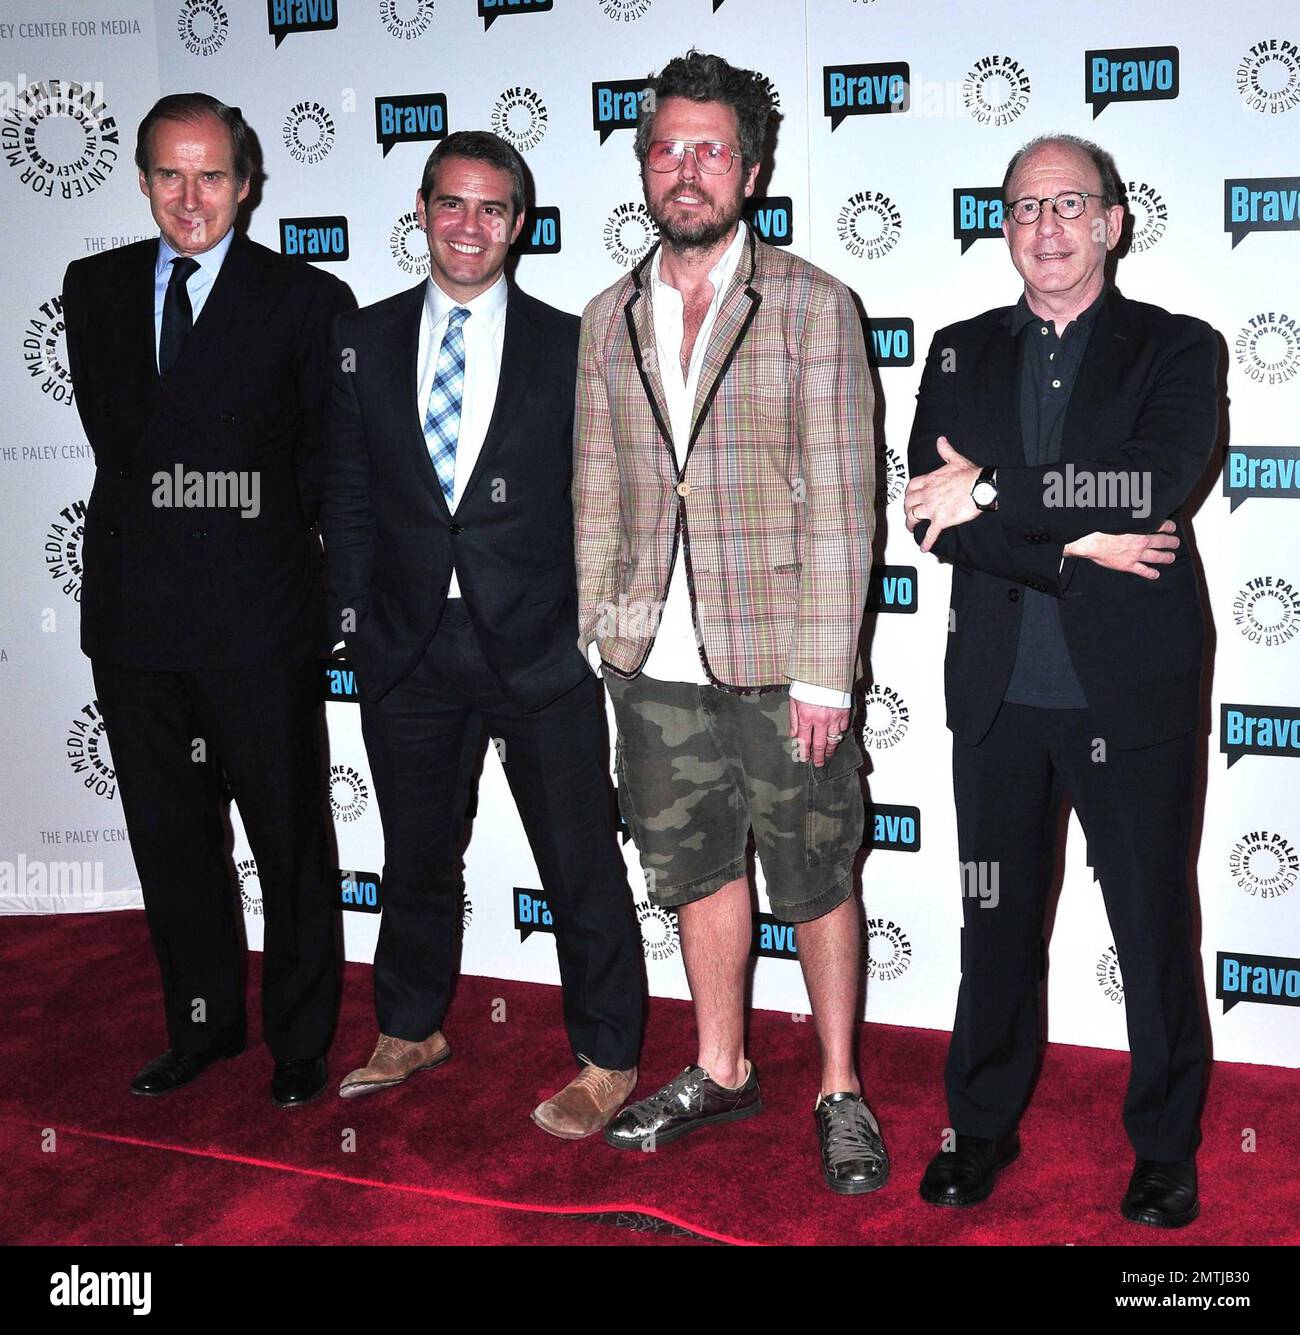 Art auctioneer and dealer Simon de Pury, producer Dan Cutforth, Bill Powers  and art critic Jerry Saltz arrive to the launch party of Bravo's new art  reality TV series Work of Art